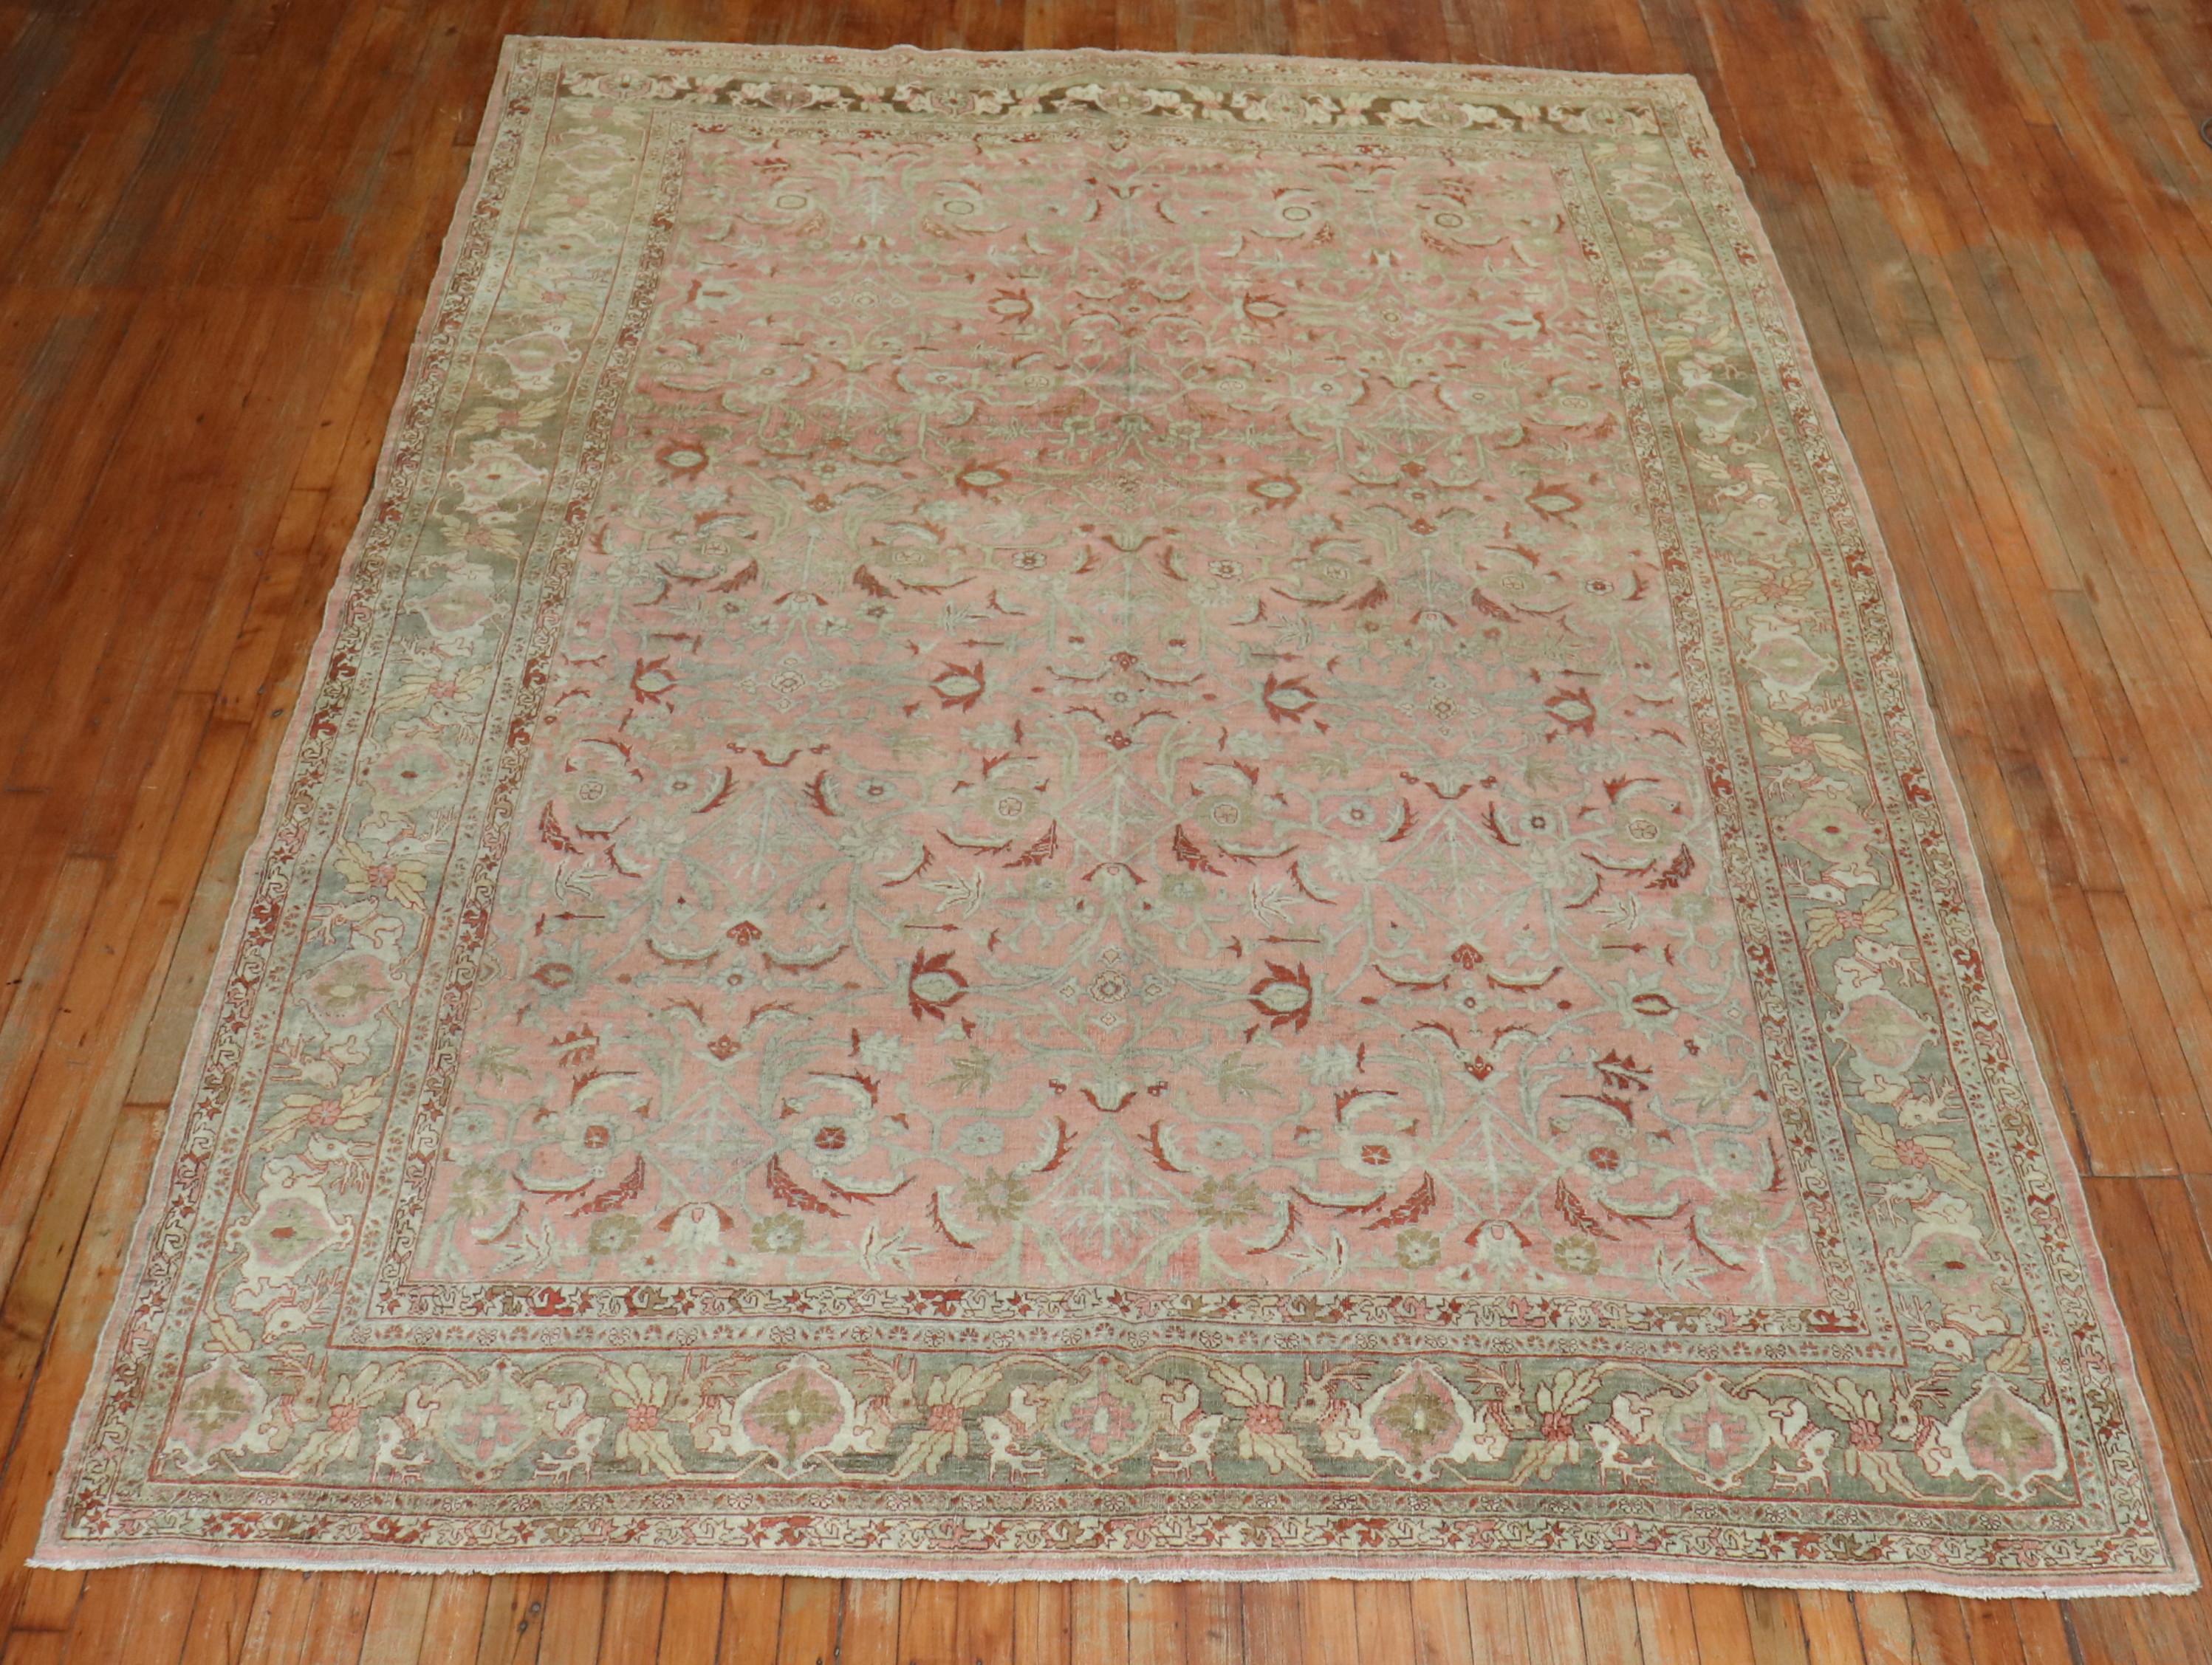 An early 20th-century Persian room size Bidjar rug with an elegant all-over floral design on a pink ground. The border is gray with deer head motifs throughout.

Measures: 7'5